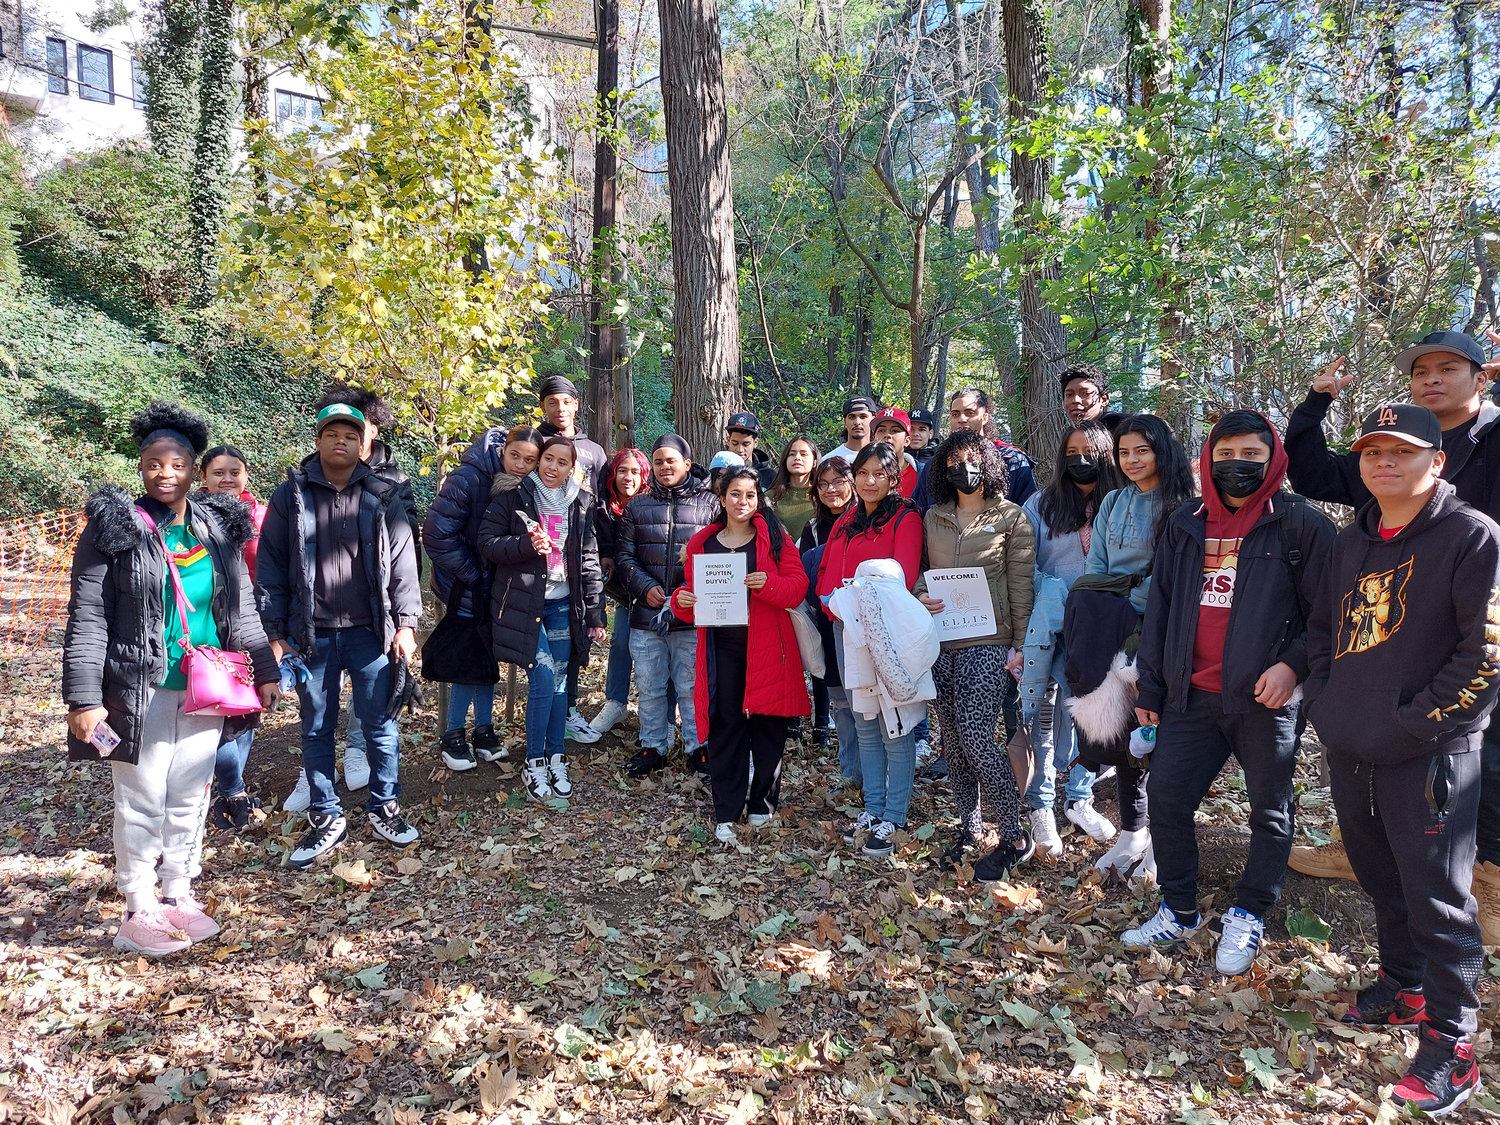 Nearly 40 students and three teachers from Elllis Preparatory Academy on the campus of John F. Kennedy High School gave back to nature and the community Nov. 23. The Friends of Spuyten Duyvil in partnership with the New York City parks department cleared out weeds and trails at Spuyten Duyvil Shorefront Park. Students,  shown at left and above, also cared for native trees. Below, some of the wood students cleared from the trails were placed near the Spuyten Duyvil Metro-North station.  “It has been a true pleasure nurturing community engagement and providing service learning opportunities to the Ellis Preparatory Academy community for the past 14 years every Thanksgiving season,” said Annel Lopez, internship program director and parent coordinator at the school.